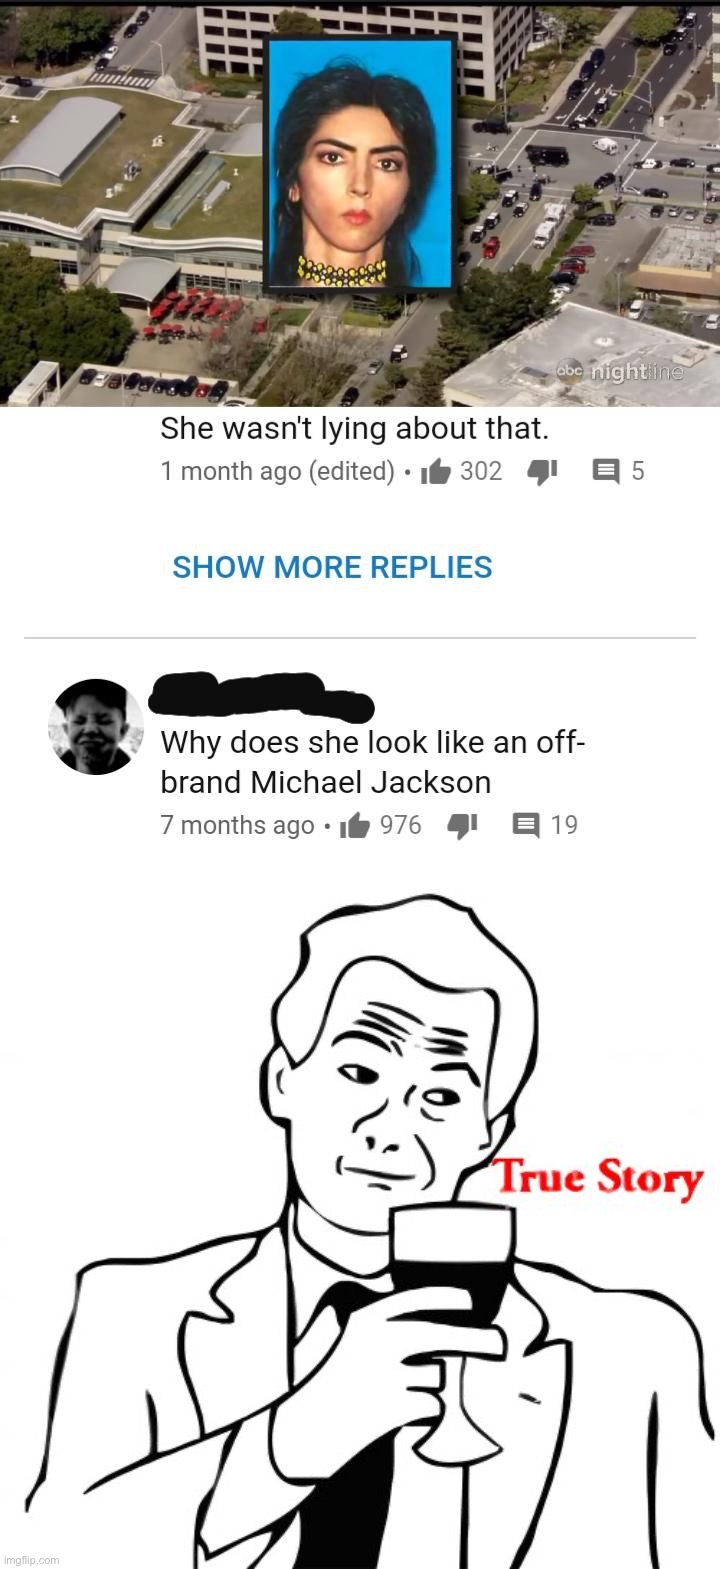 She does doesn’t she!? | image tagged in memes,true story,funny,michael jackson,rekt,oh wow | made w/ Imgflip meme maker